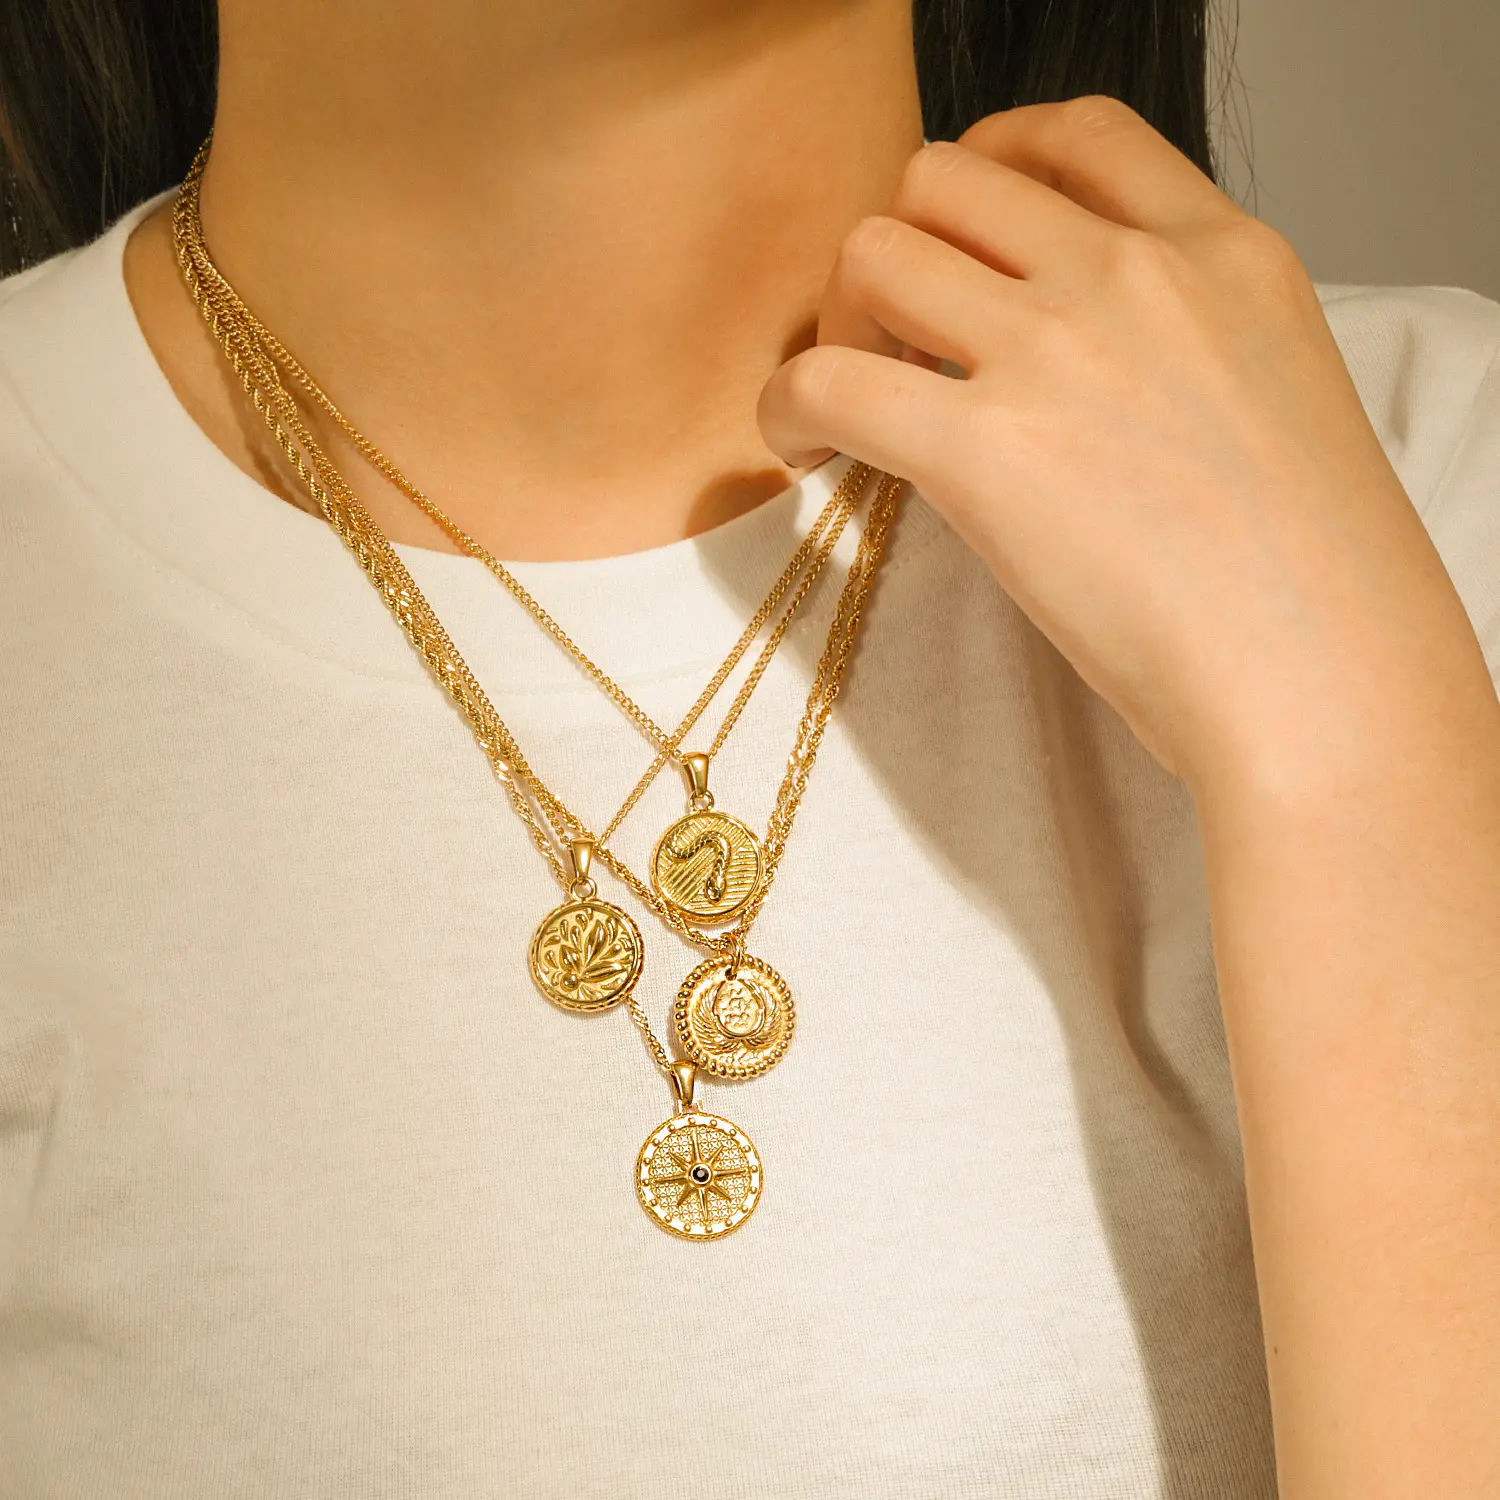 2021 Trendy Gold Filled Coin Necklace Pendant Stainless Steel Ancient Greek Coin Necklace